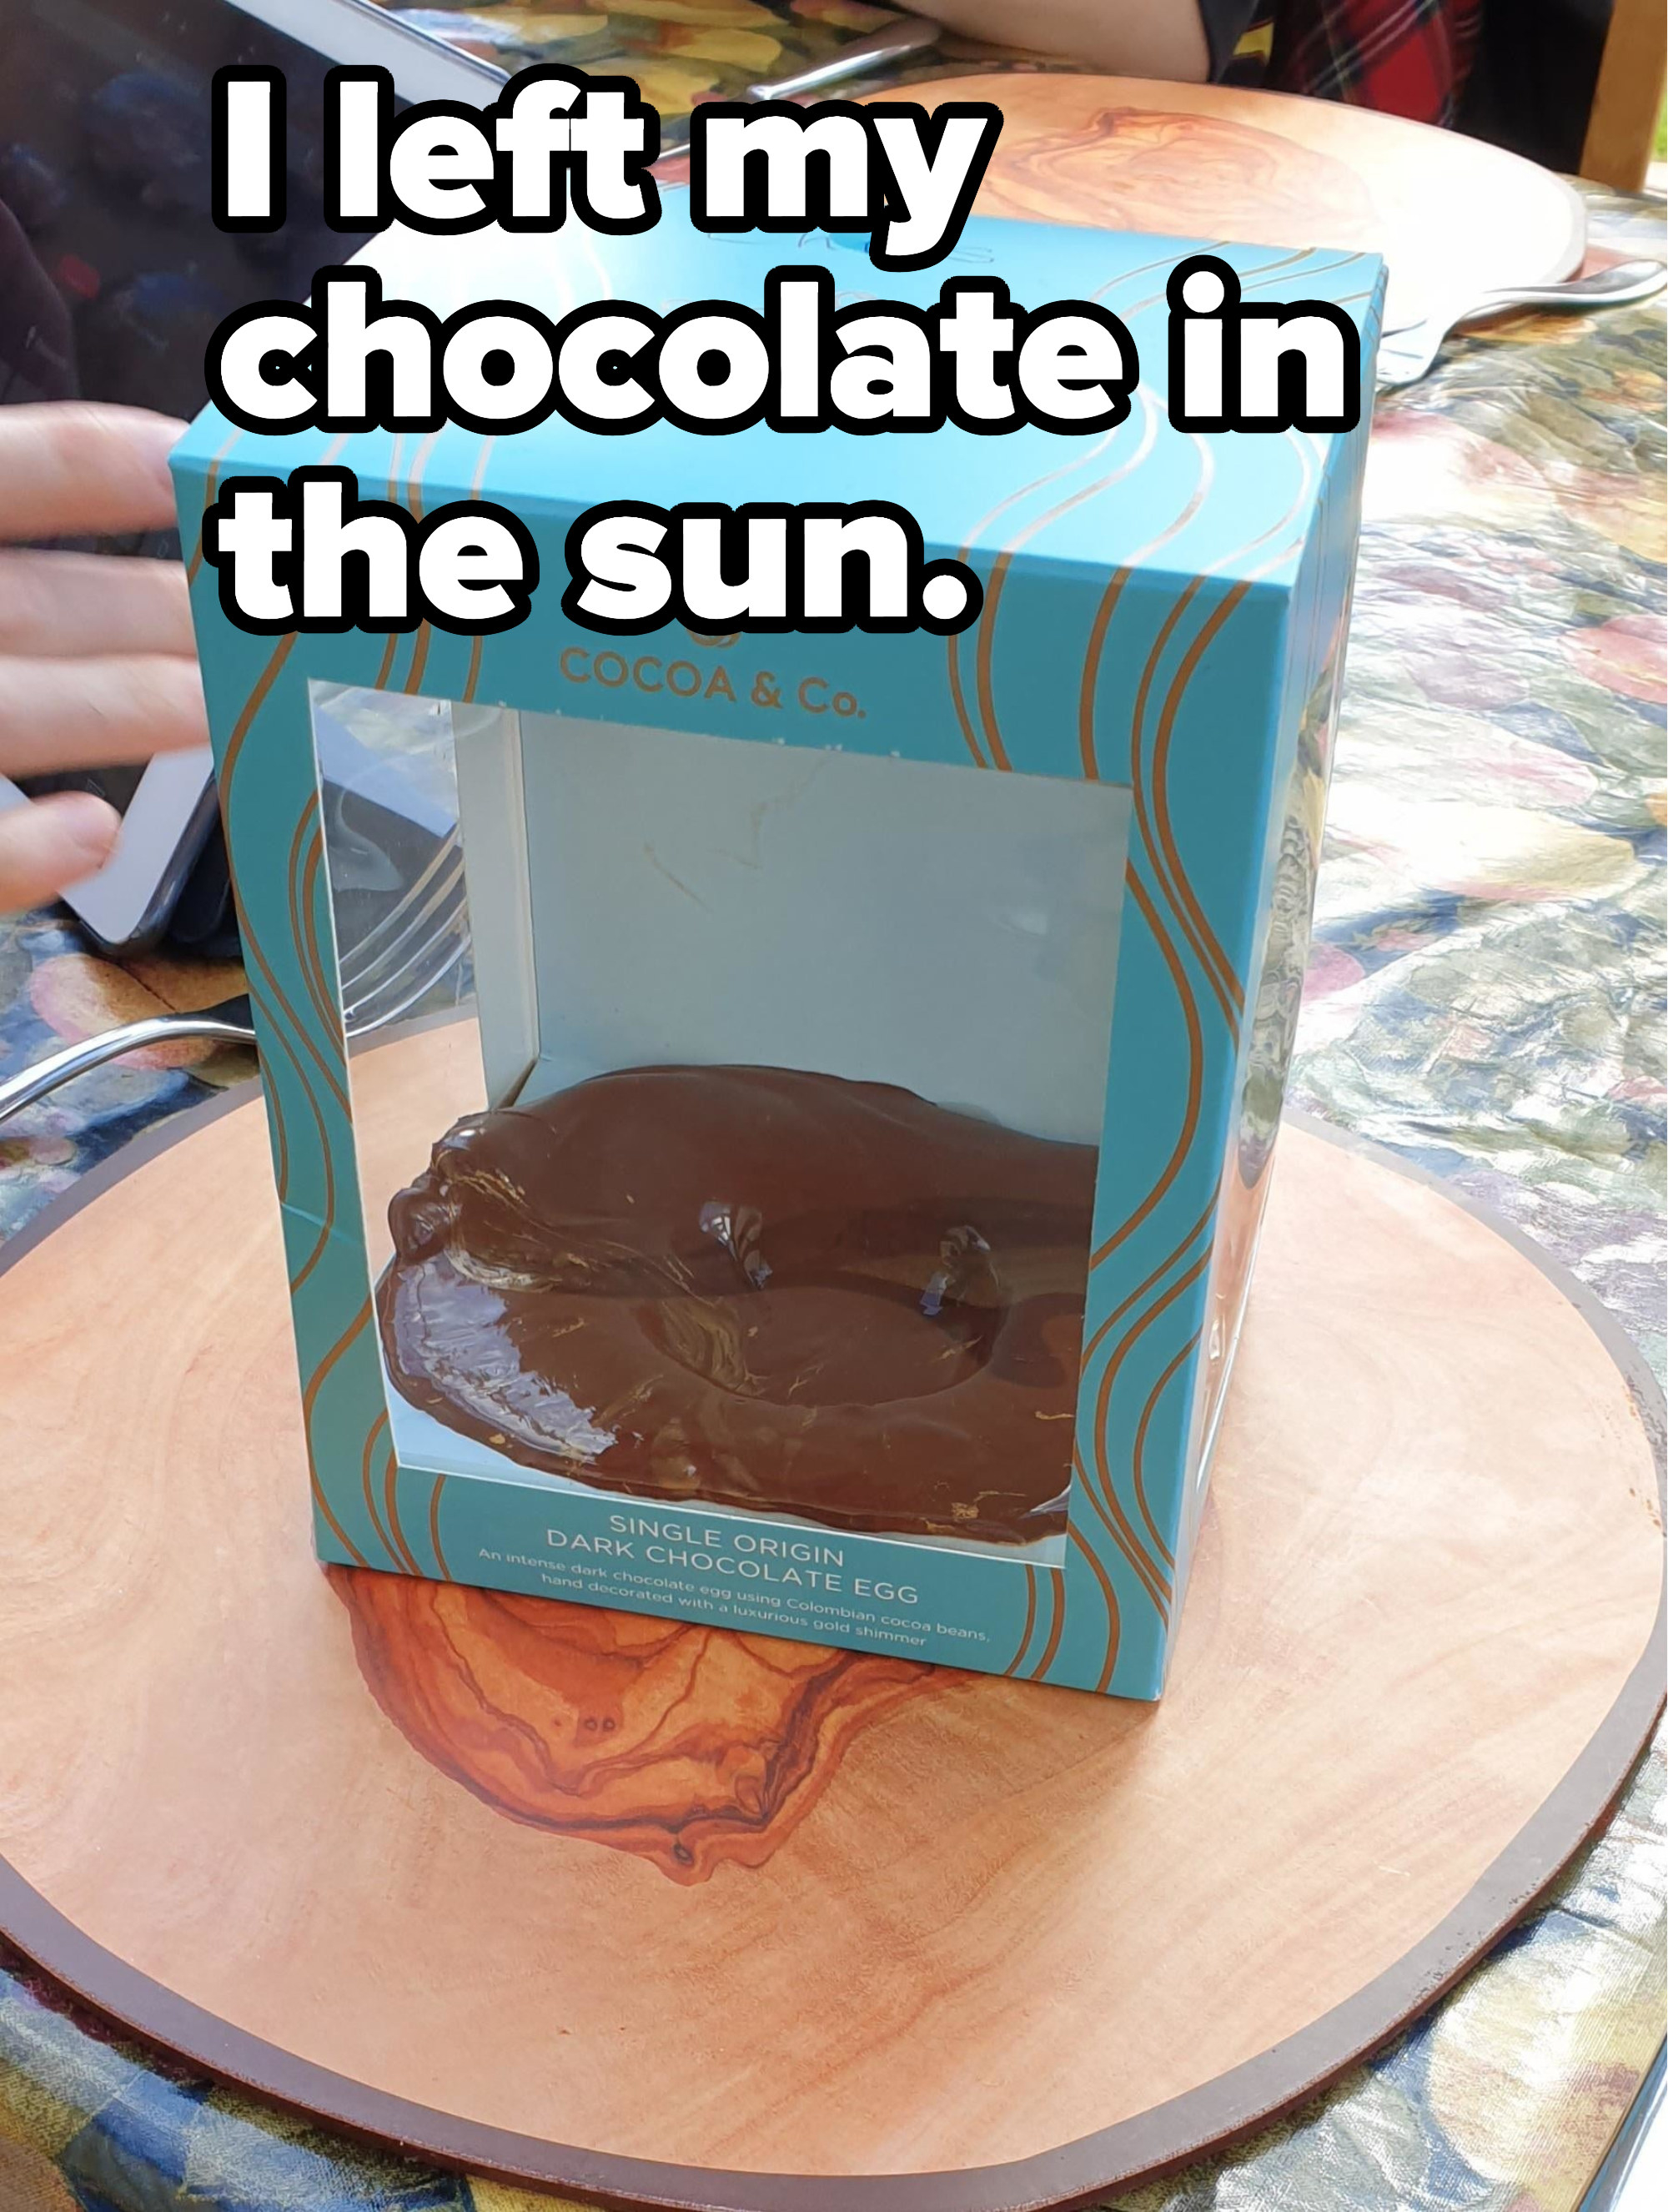 A melted chocolate egg in a box left in the sun